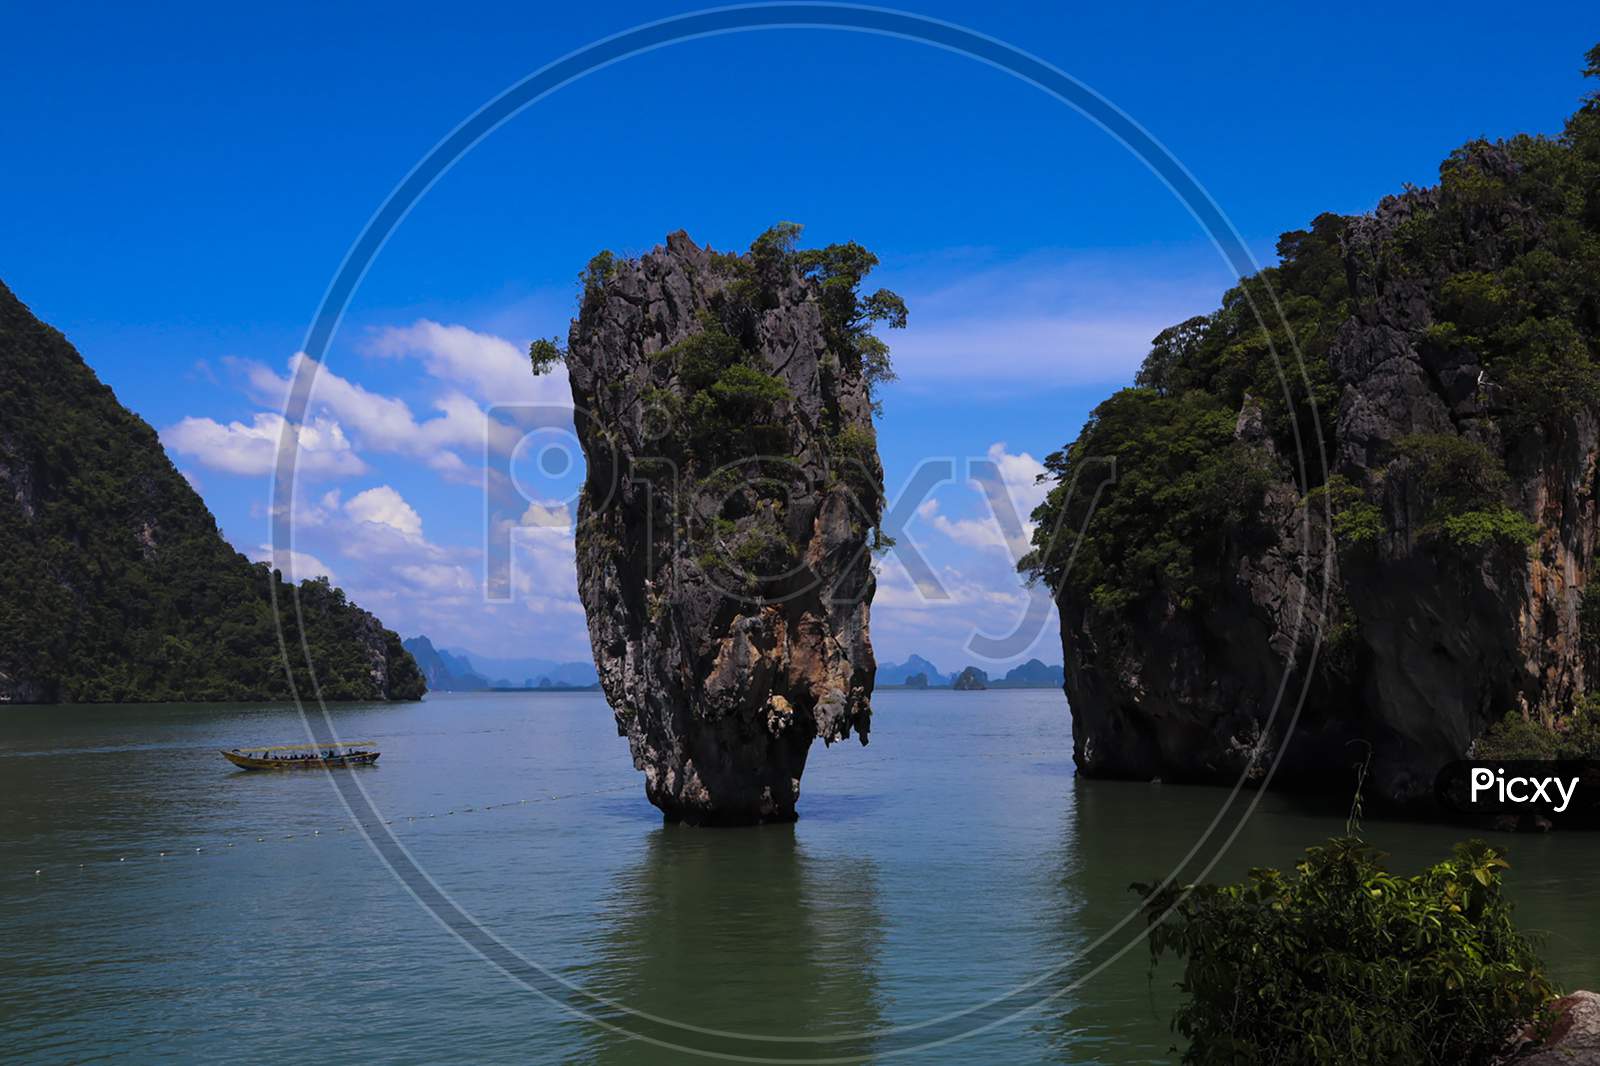 Beautiful View of Rock, sea and Clouds at James bond island